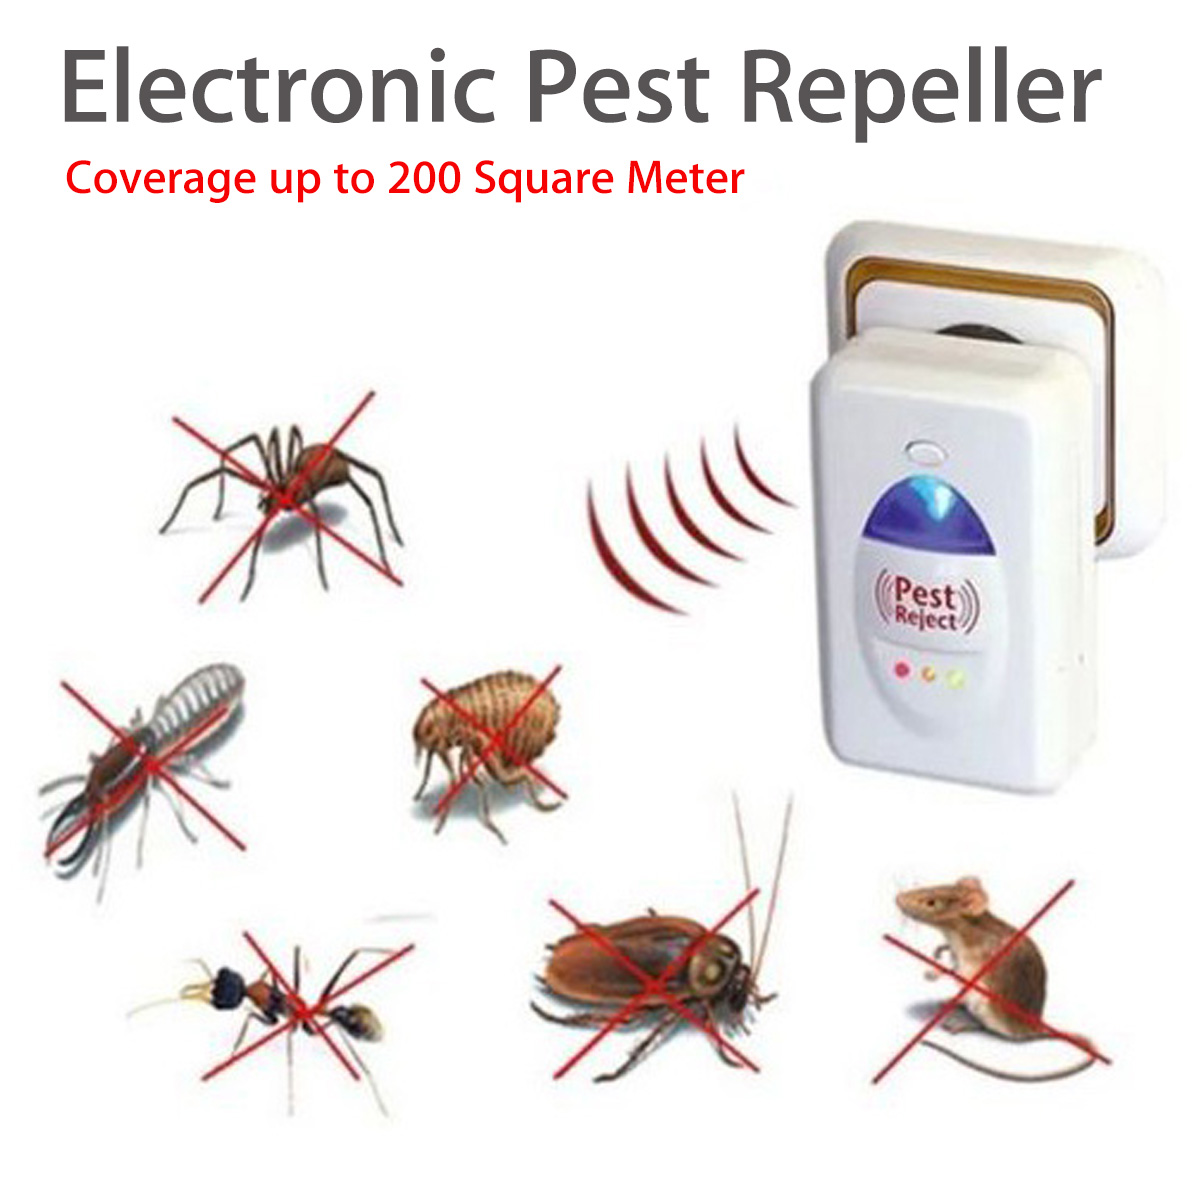 Ultrasonic-Electronic-Pest-Animal-Repeller-Reject-Anti-Mosquito-Bug-Insect-Enhanced-1397436-1